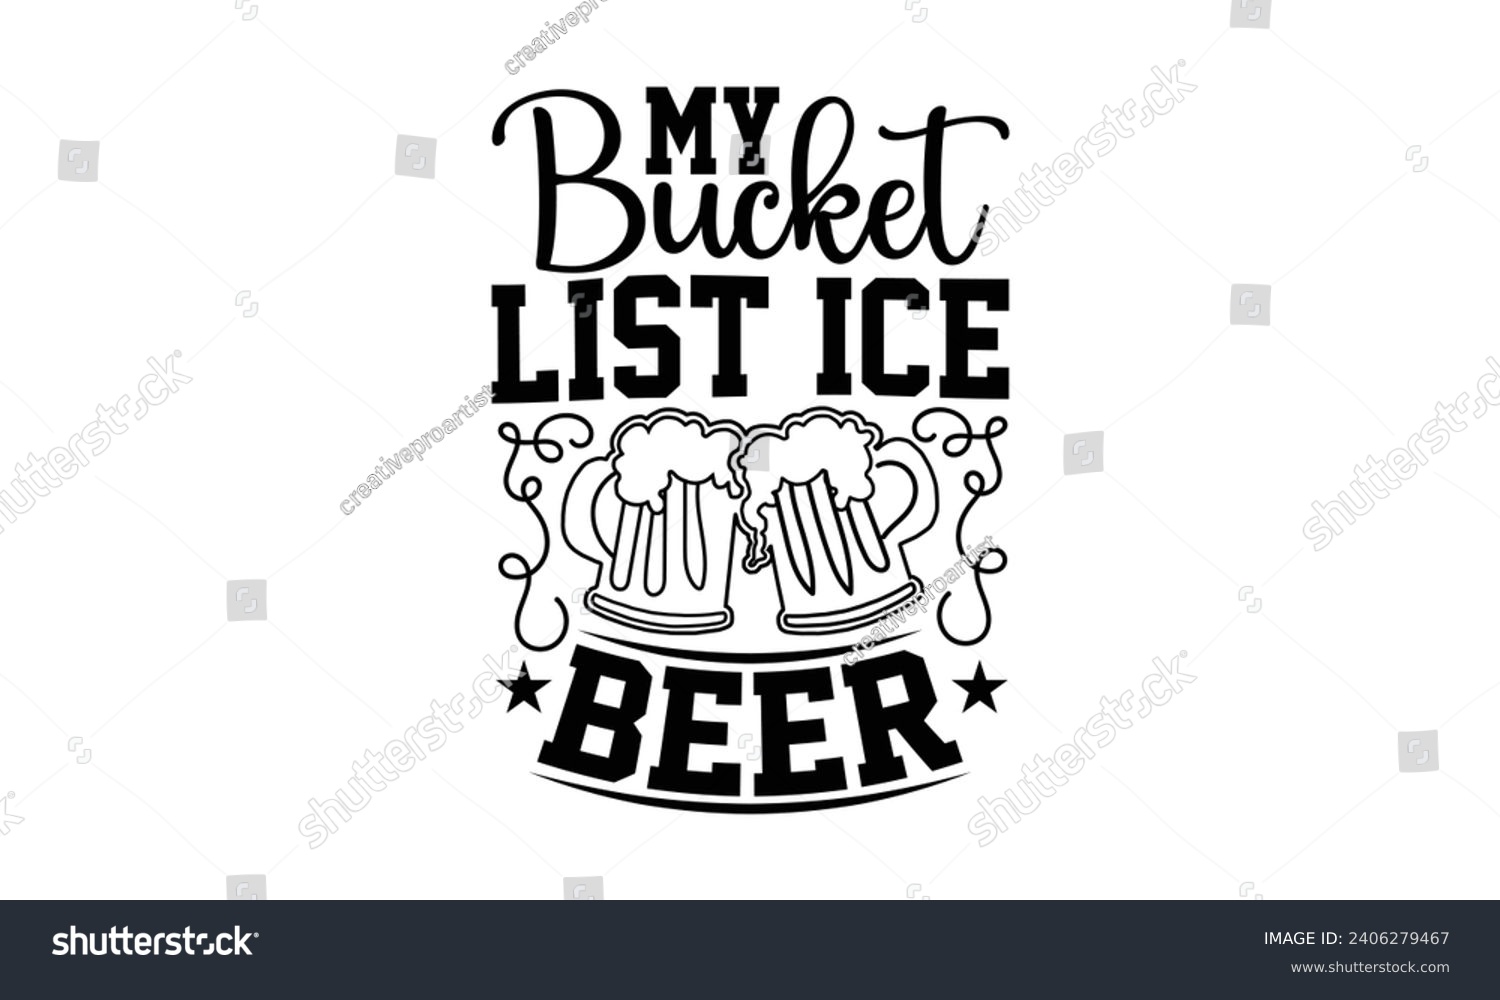 SVG of My Bucket List Ice Beer- Beer t- shirt design, Handmade calligraphy vector illustration for Cutting Machine, Silhouette Cameo, Cricut, Vector illustration Template. svg